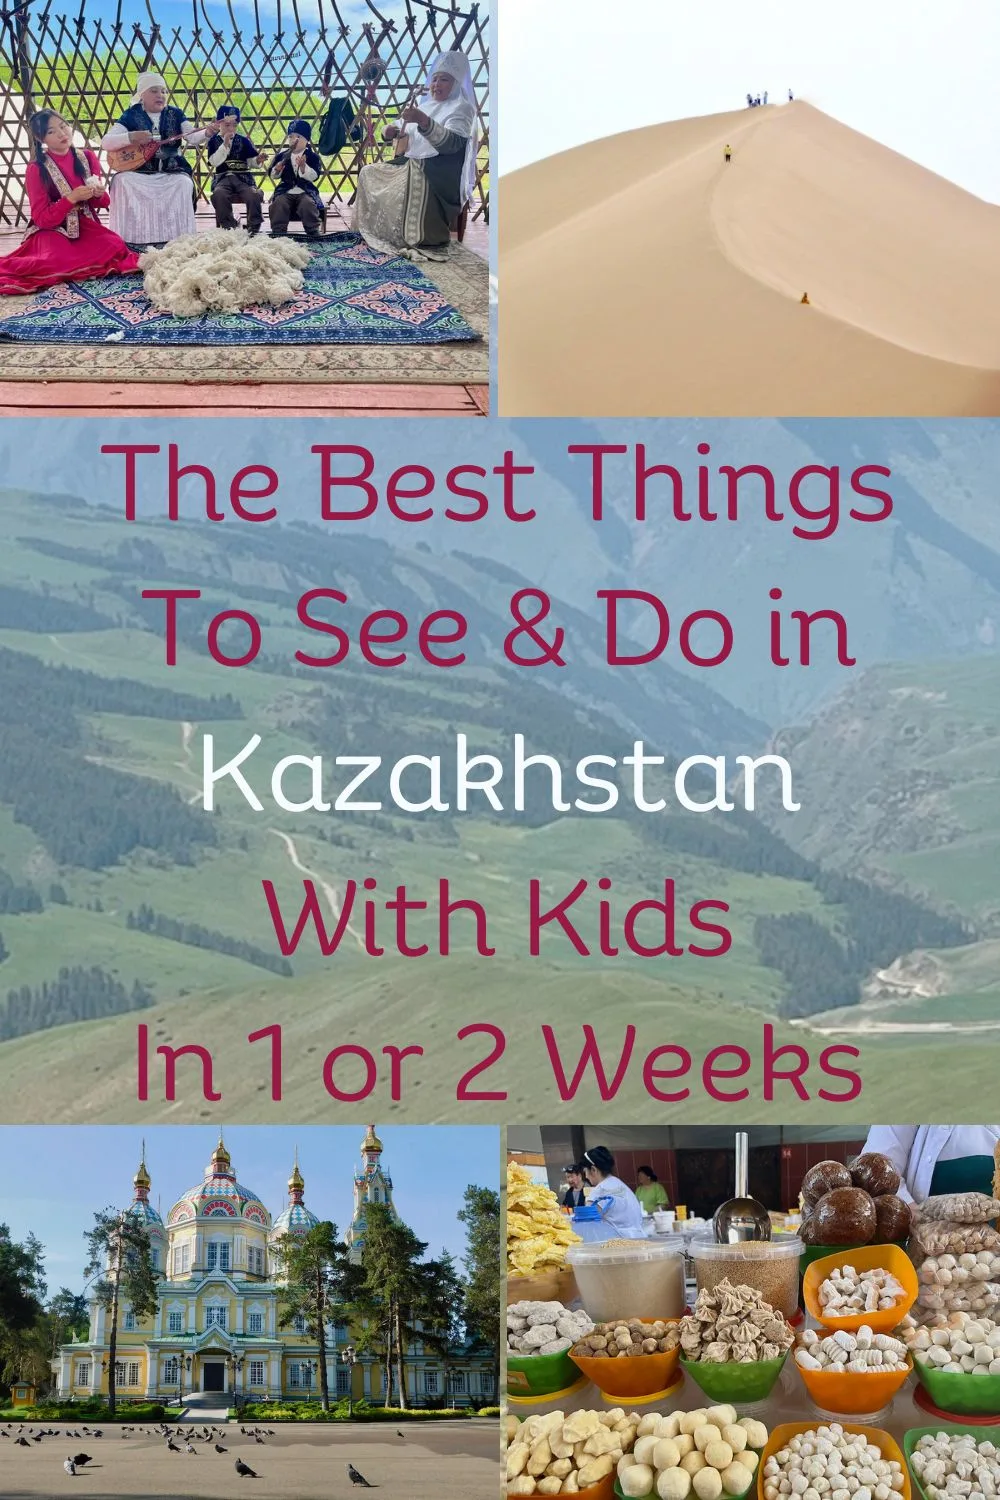 kazahstan has a lot of culture, food and nature that you can easily explore with kids in 1 or 2 weeks. here is an itinerary of some of the best things to do and see in and around almaty. 